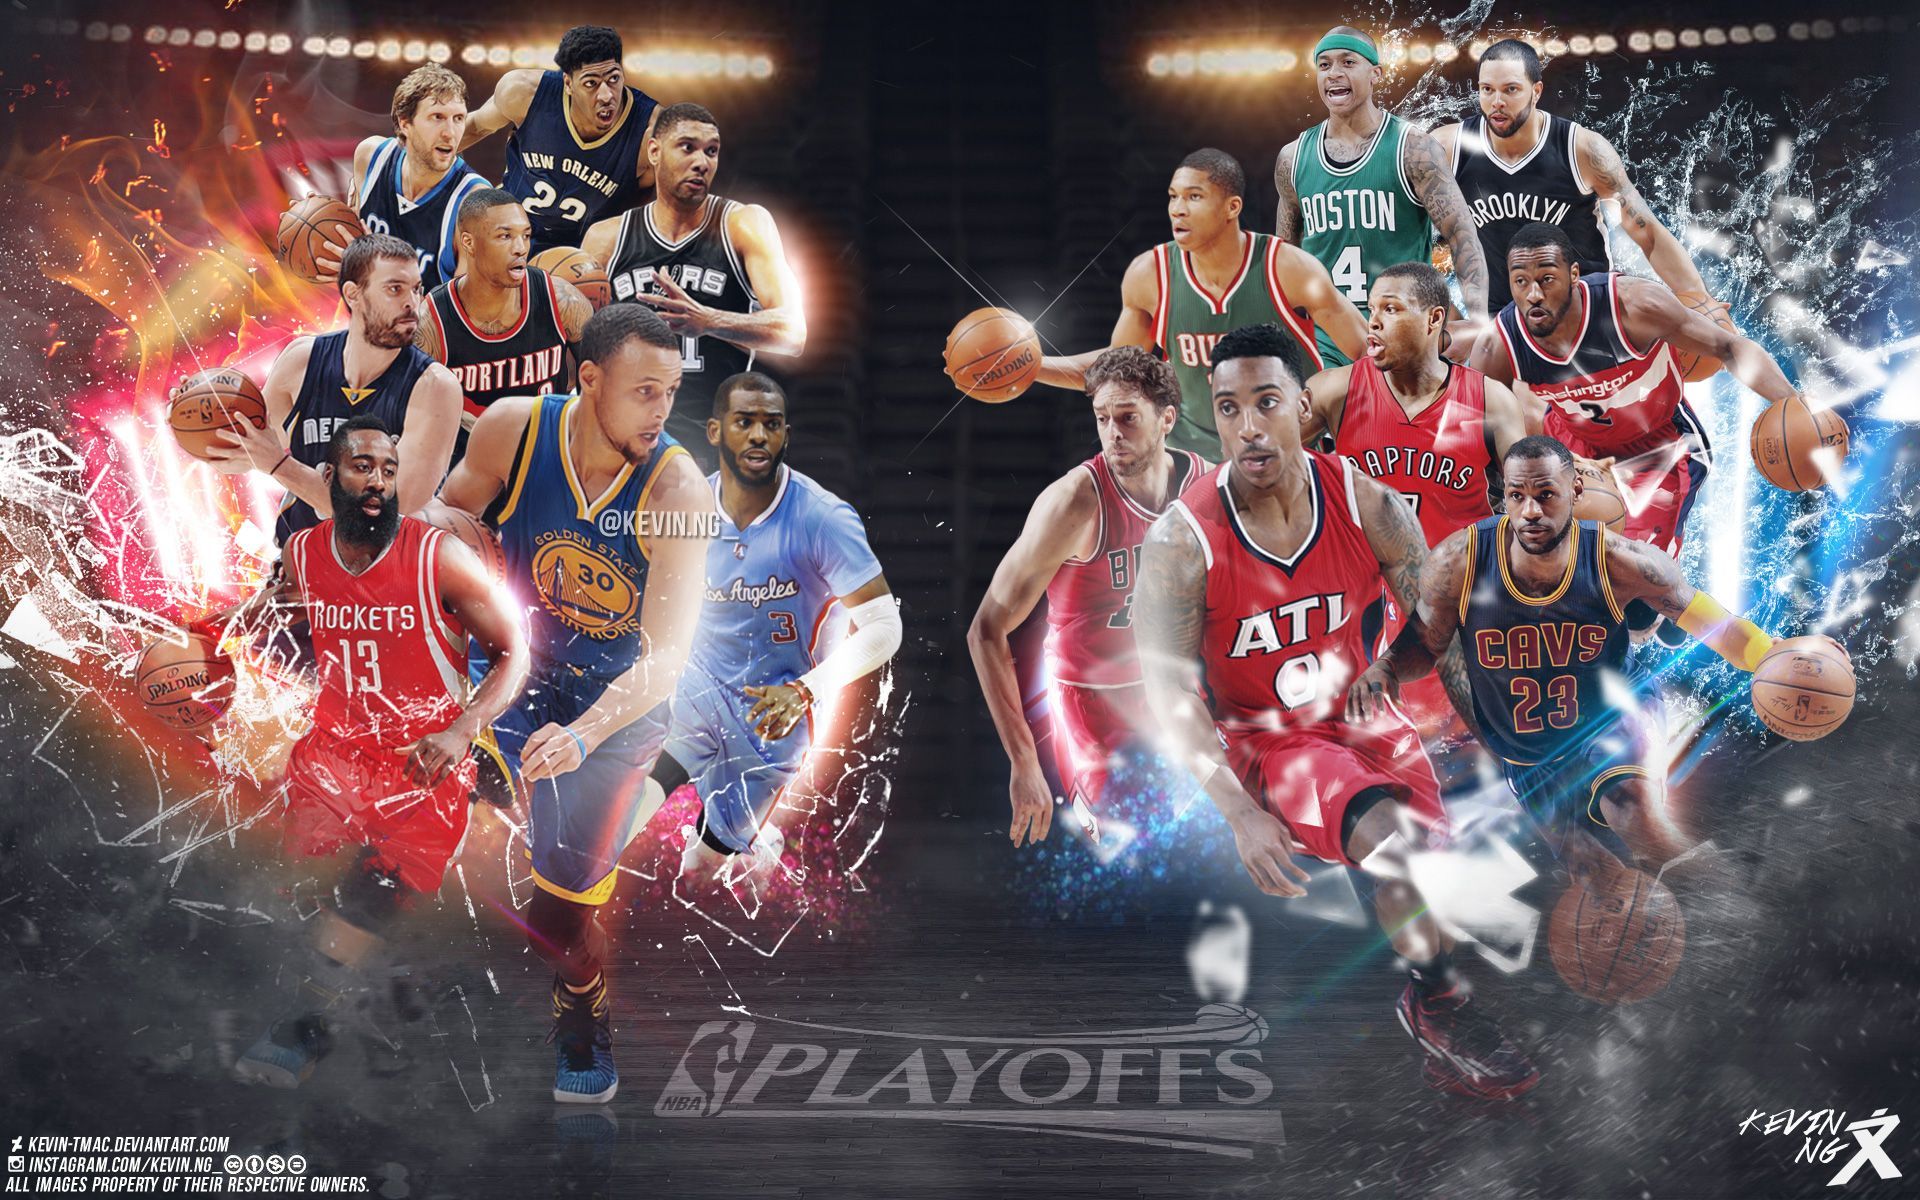 Uncategorized NBA Wallpapers | Basketball Wallpapers at ...